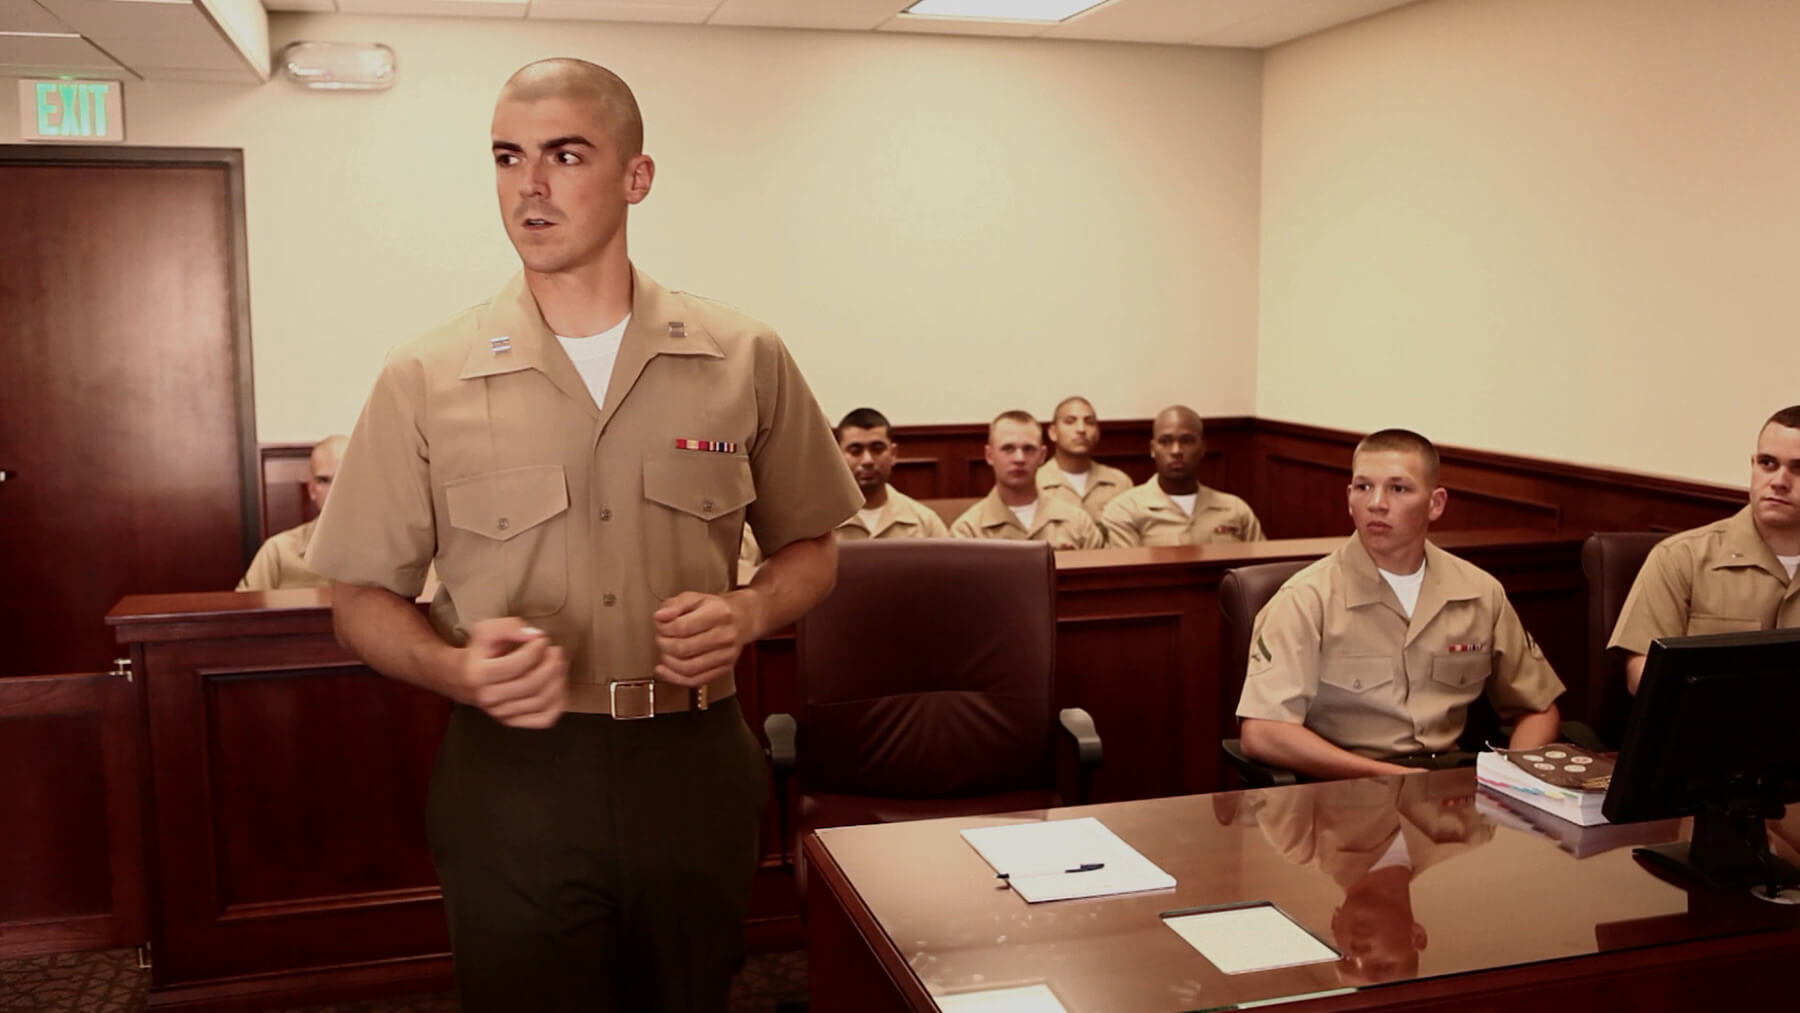 Roles in the Corps/Marine Corps Judge Advocate | Marines.com